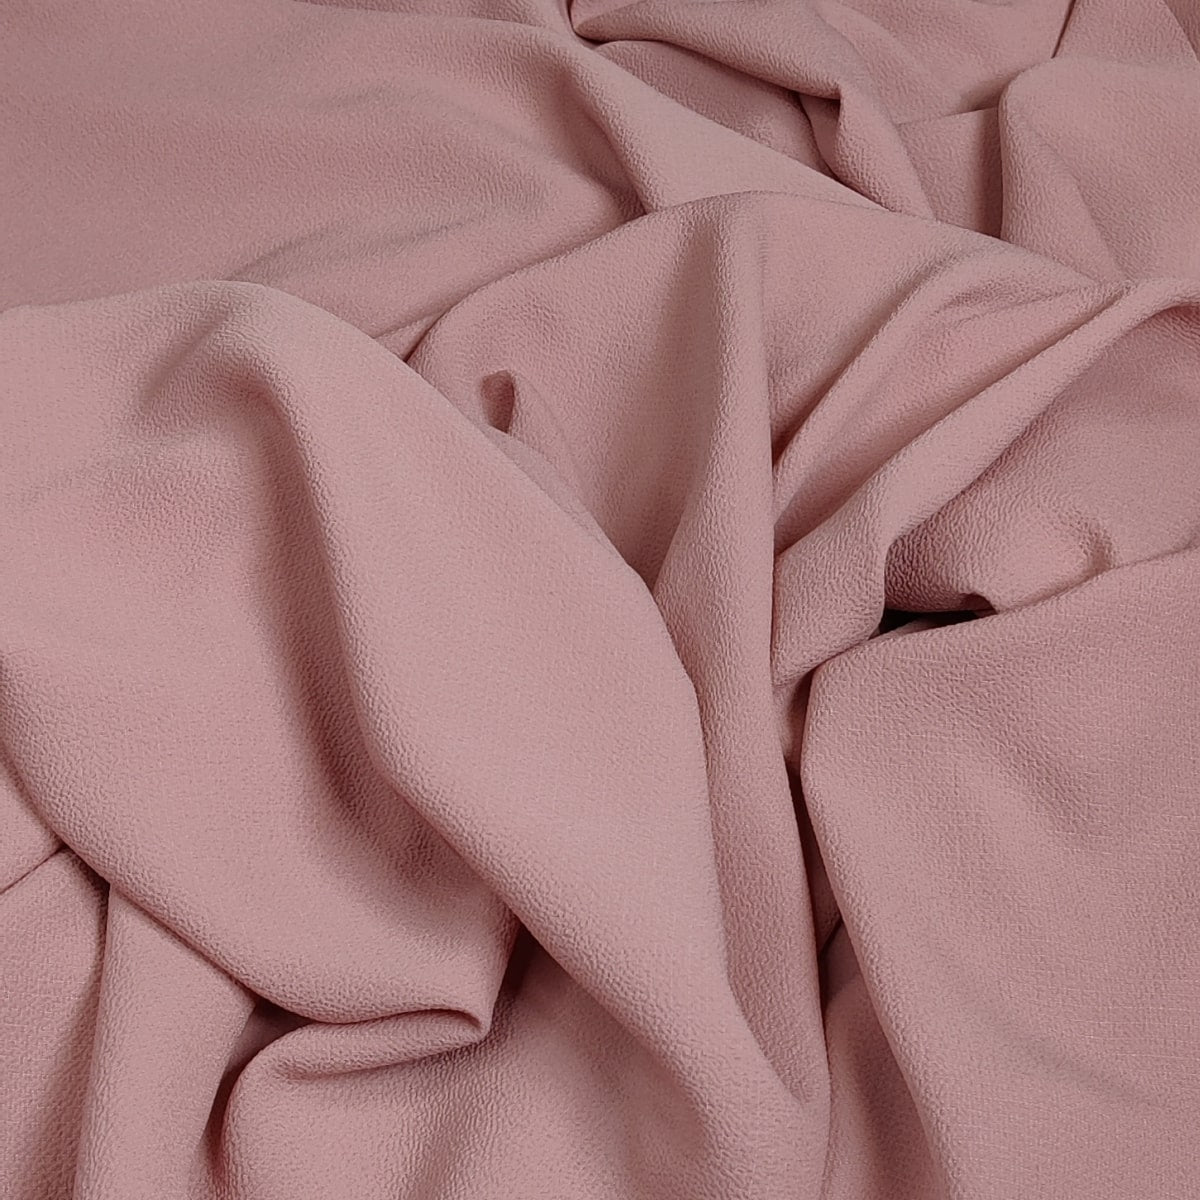 Crepe Fabric - Dusty Pink 